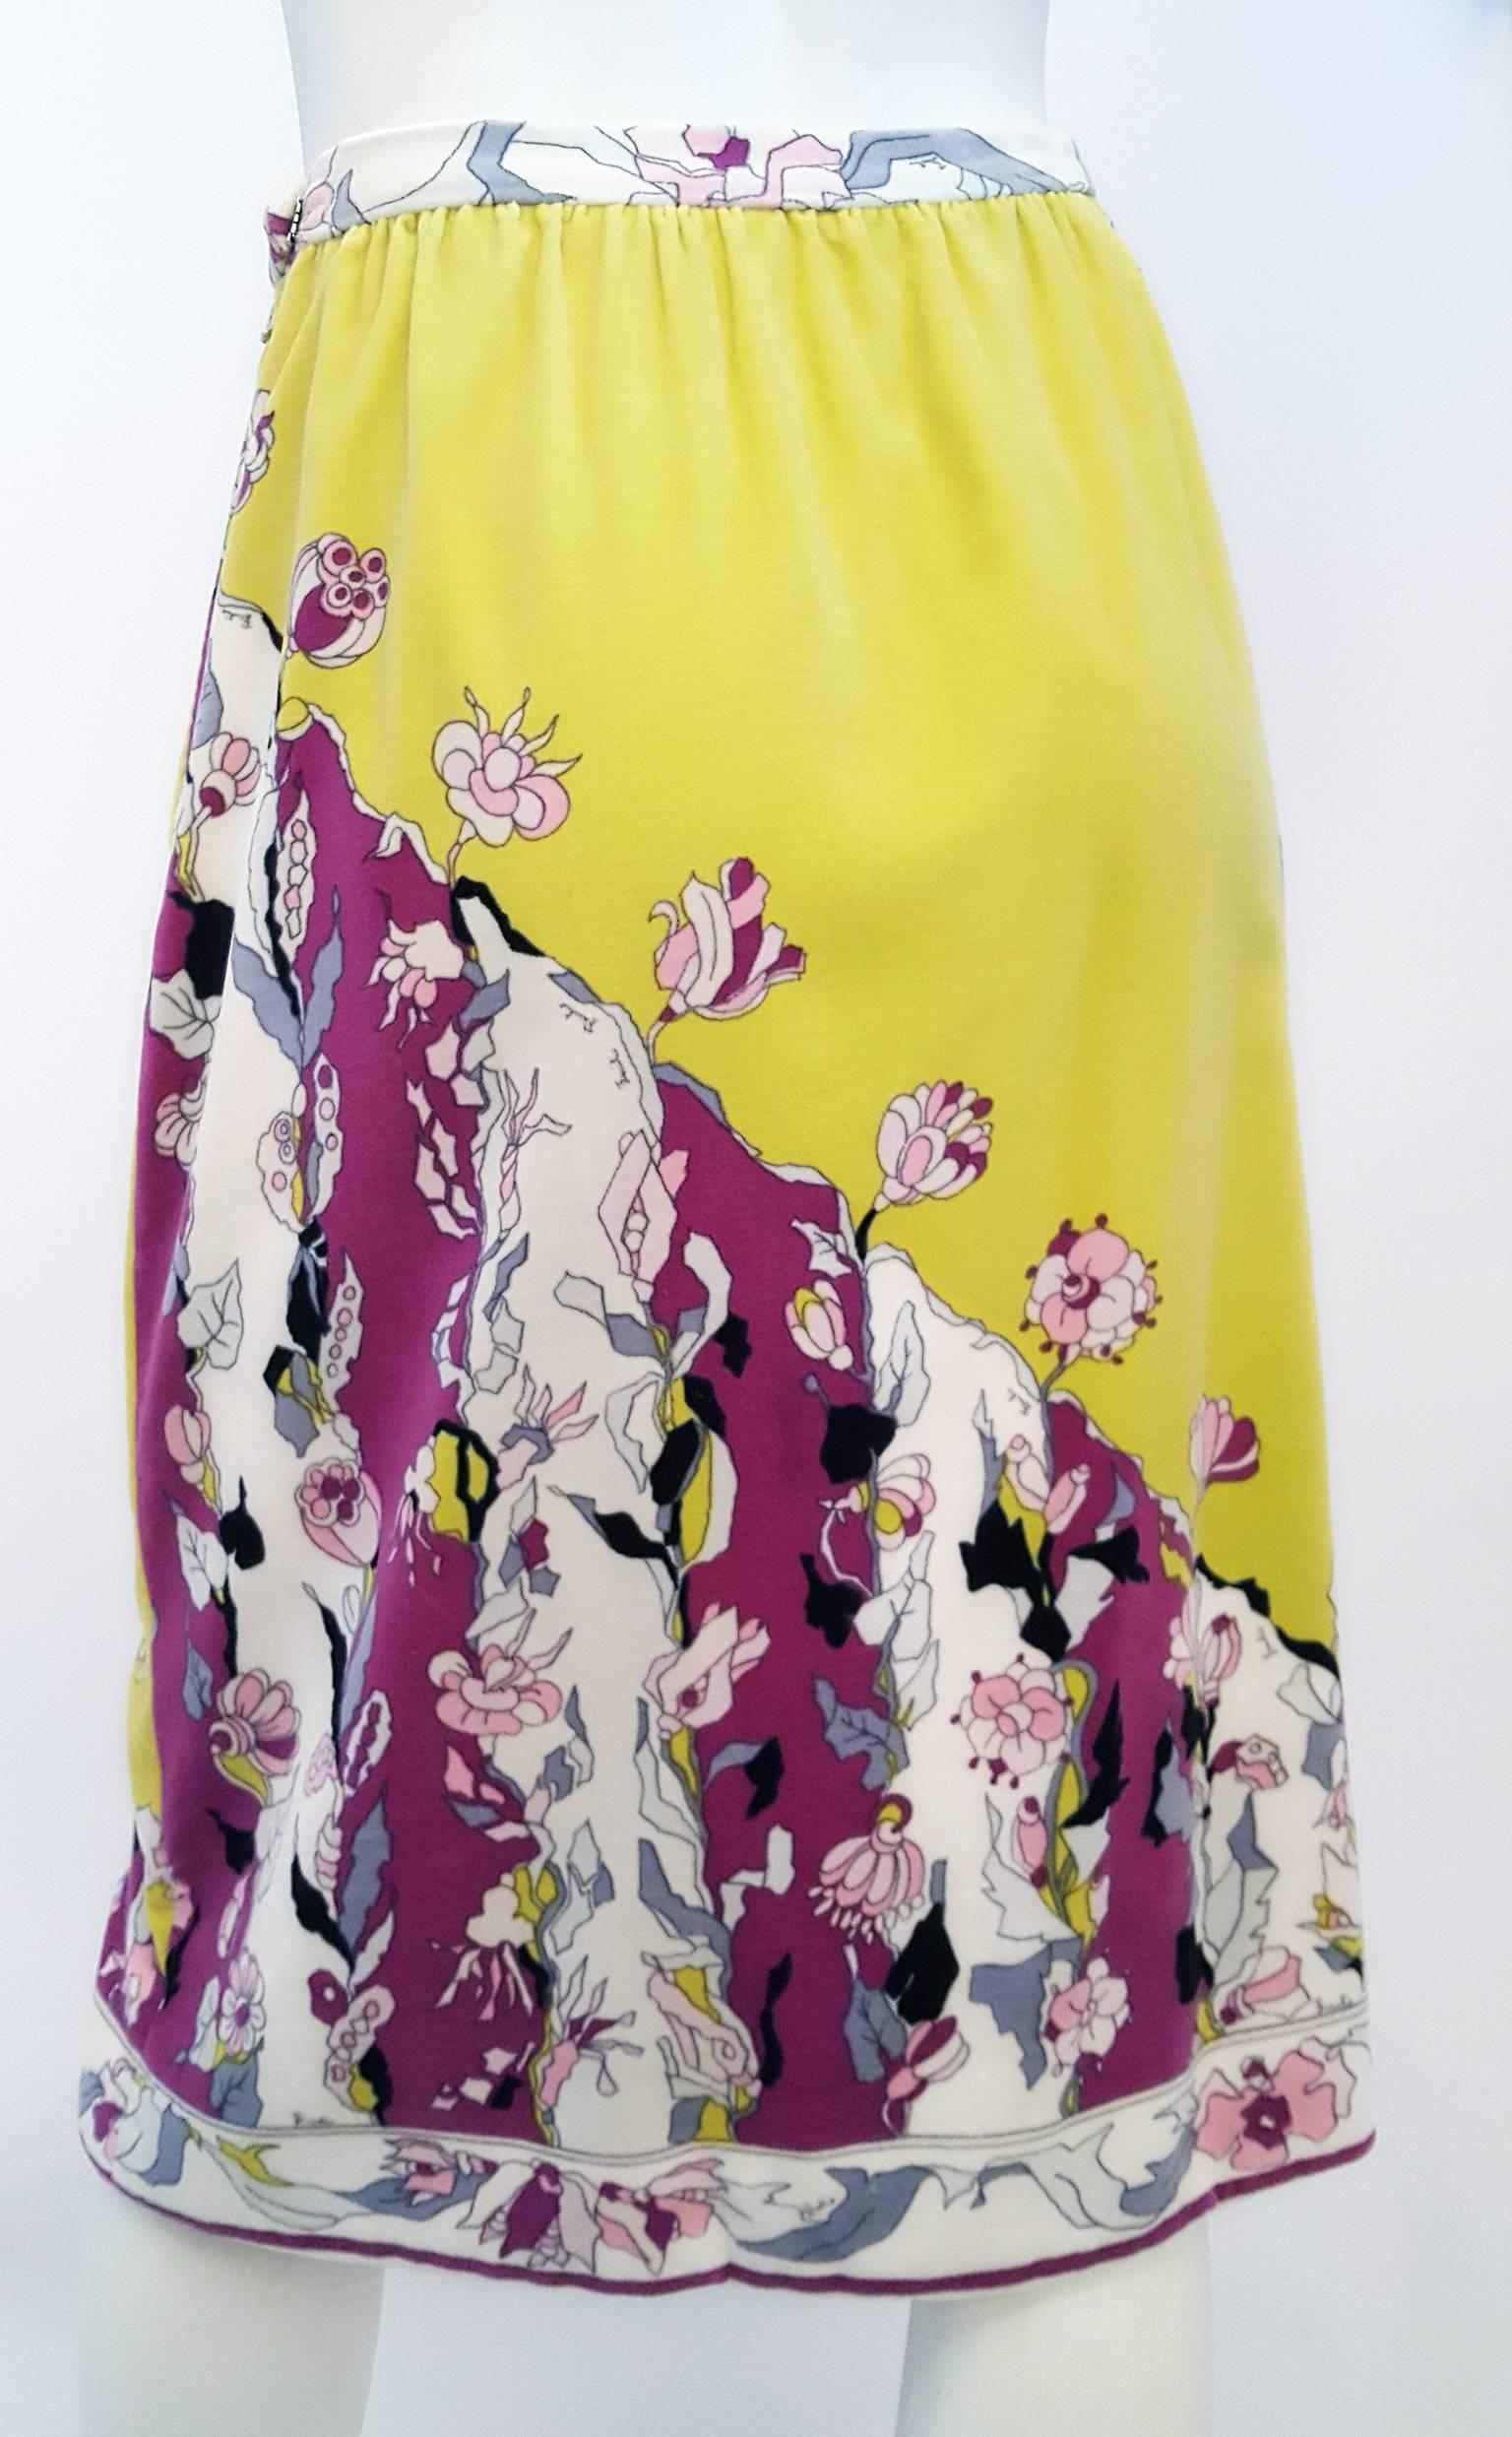 Velvet Pucci Skirt with Floral Print. Marked size 12. Made in Italy. Side zip closure. 